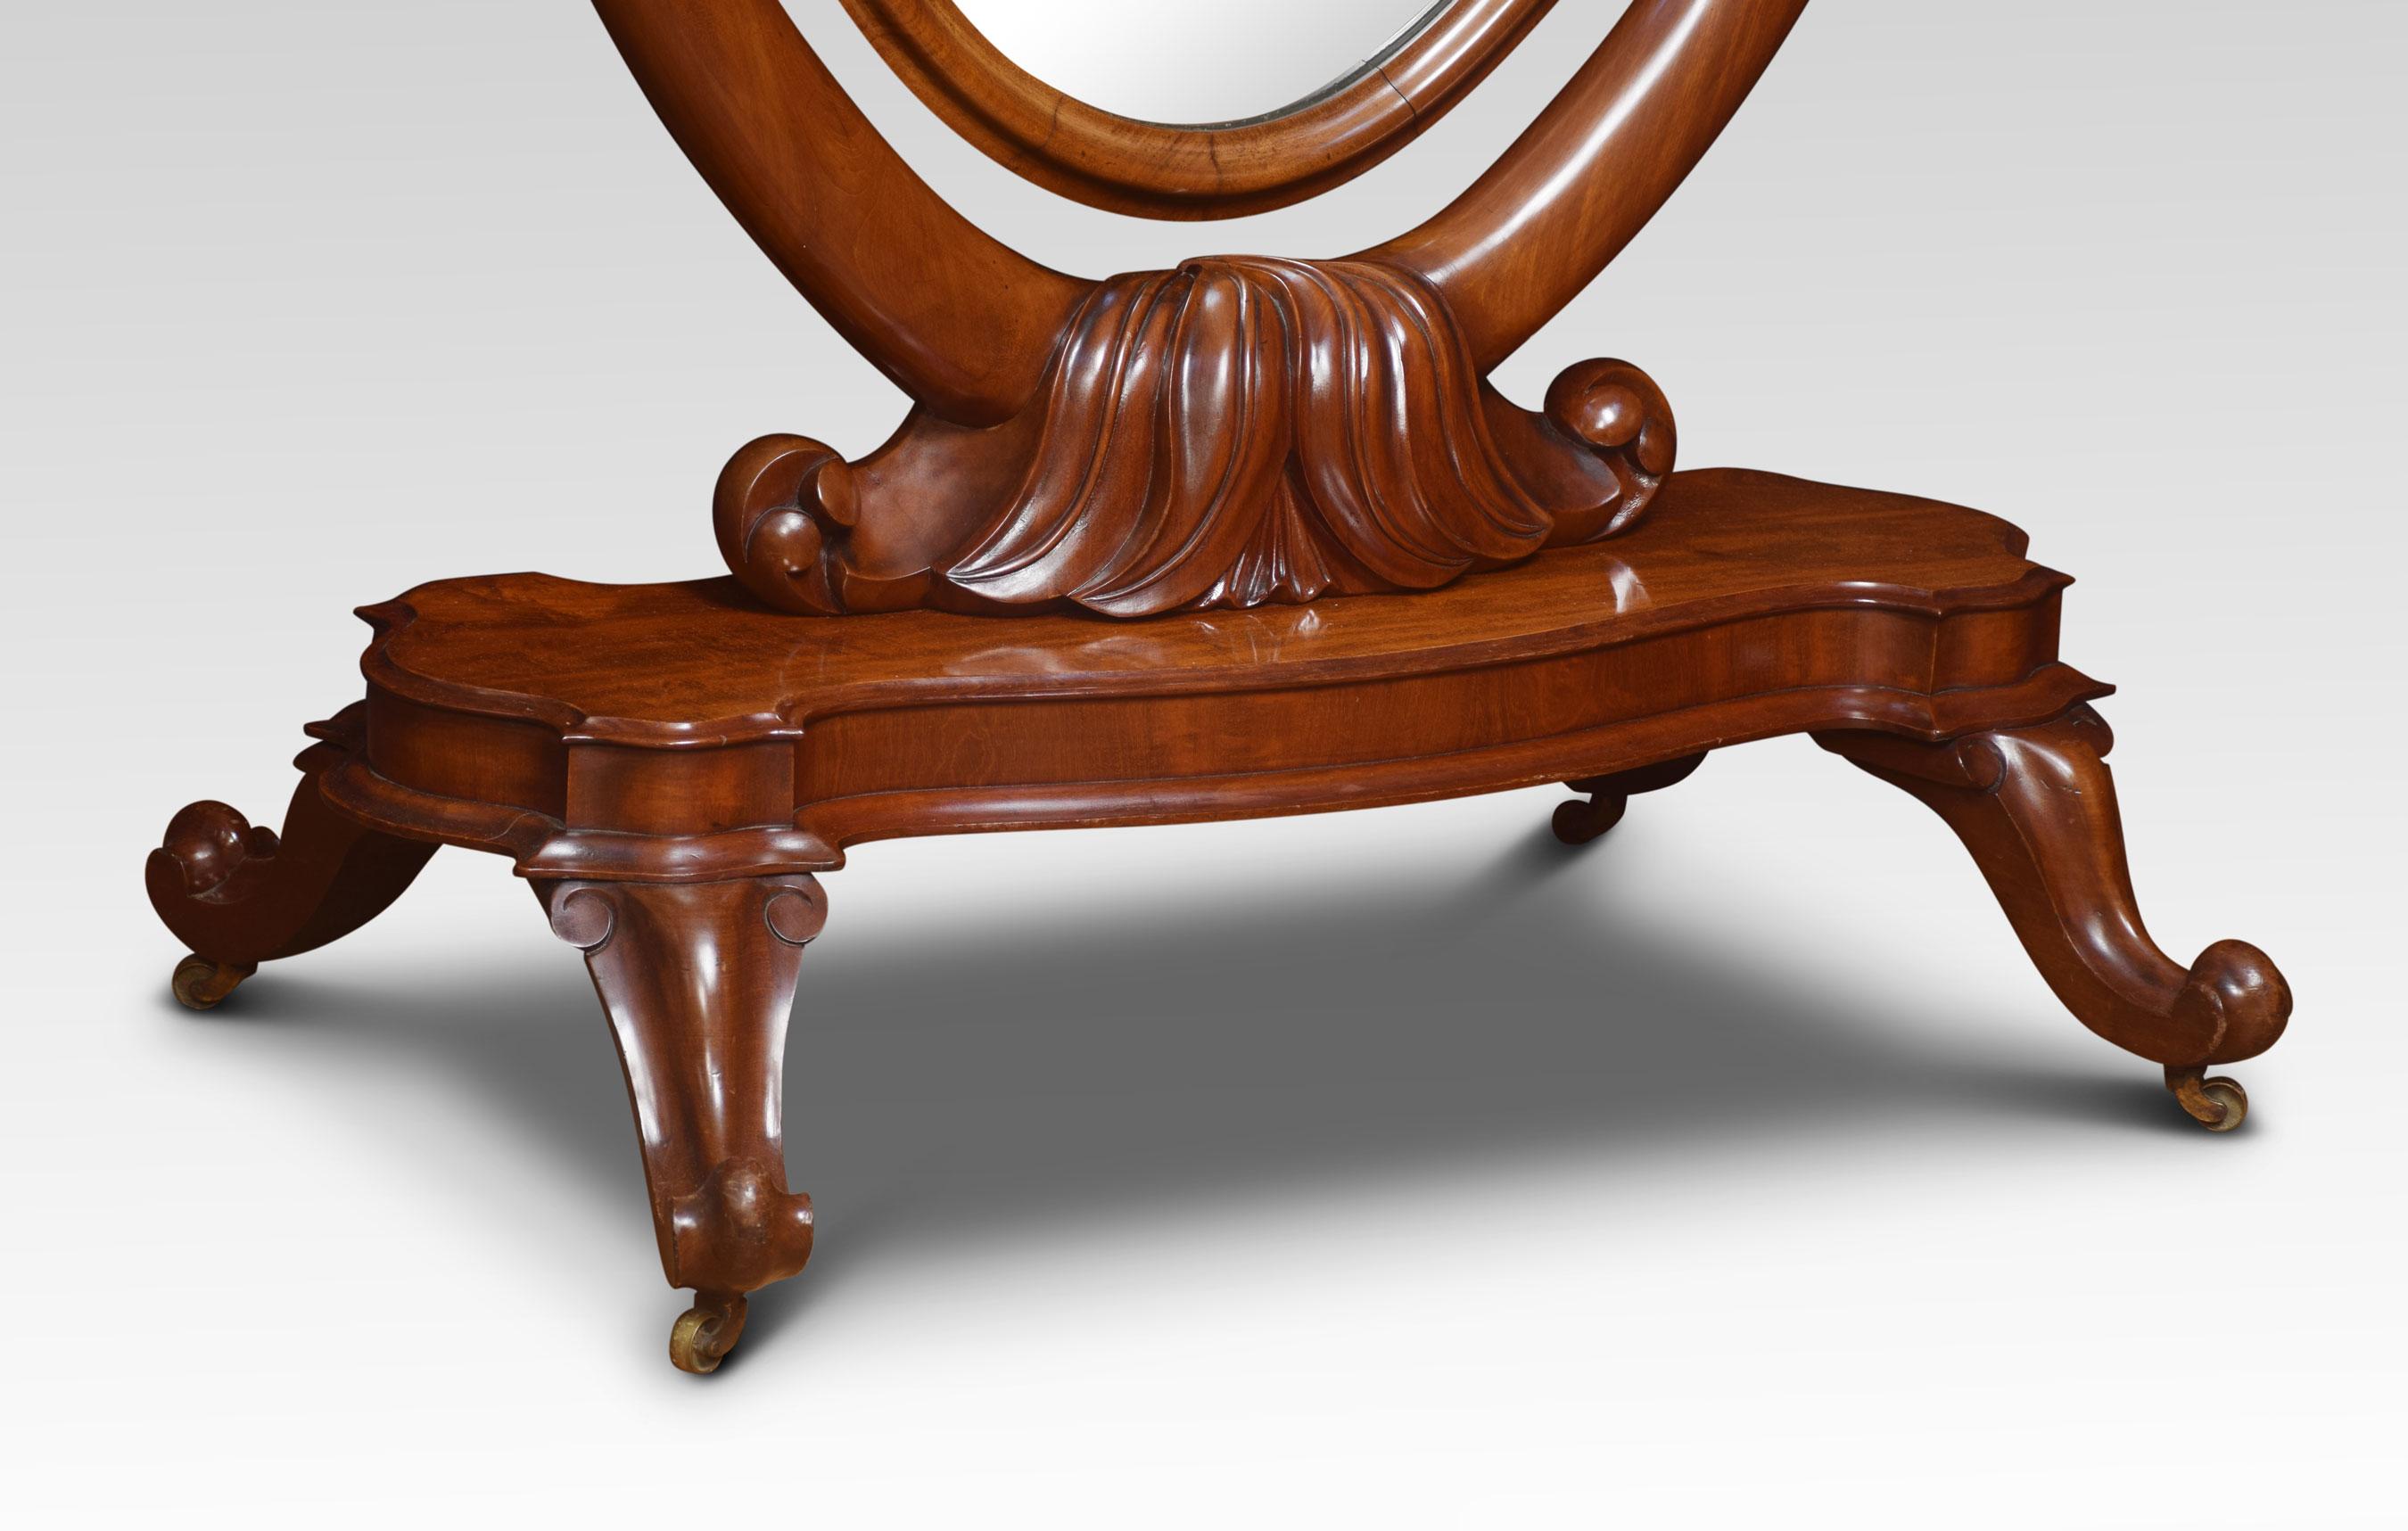 19th century mahogany cheval mirror the molded frame enclosing the adjustable oval mirror plate flanked by scrolling supports. All raised up a stepped base and down swept legs terminating in brass castors.
Dimensions
Height 68.5 inches
Width 41